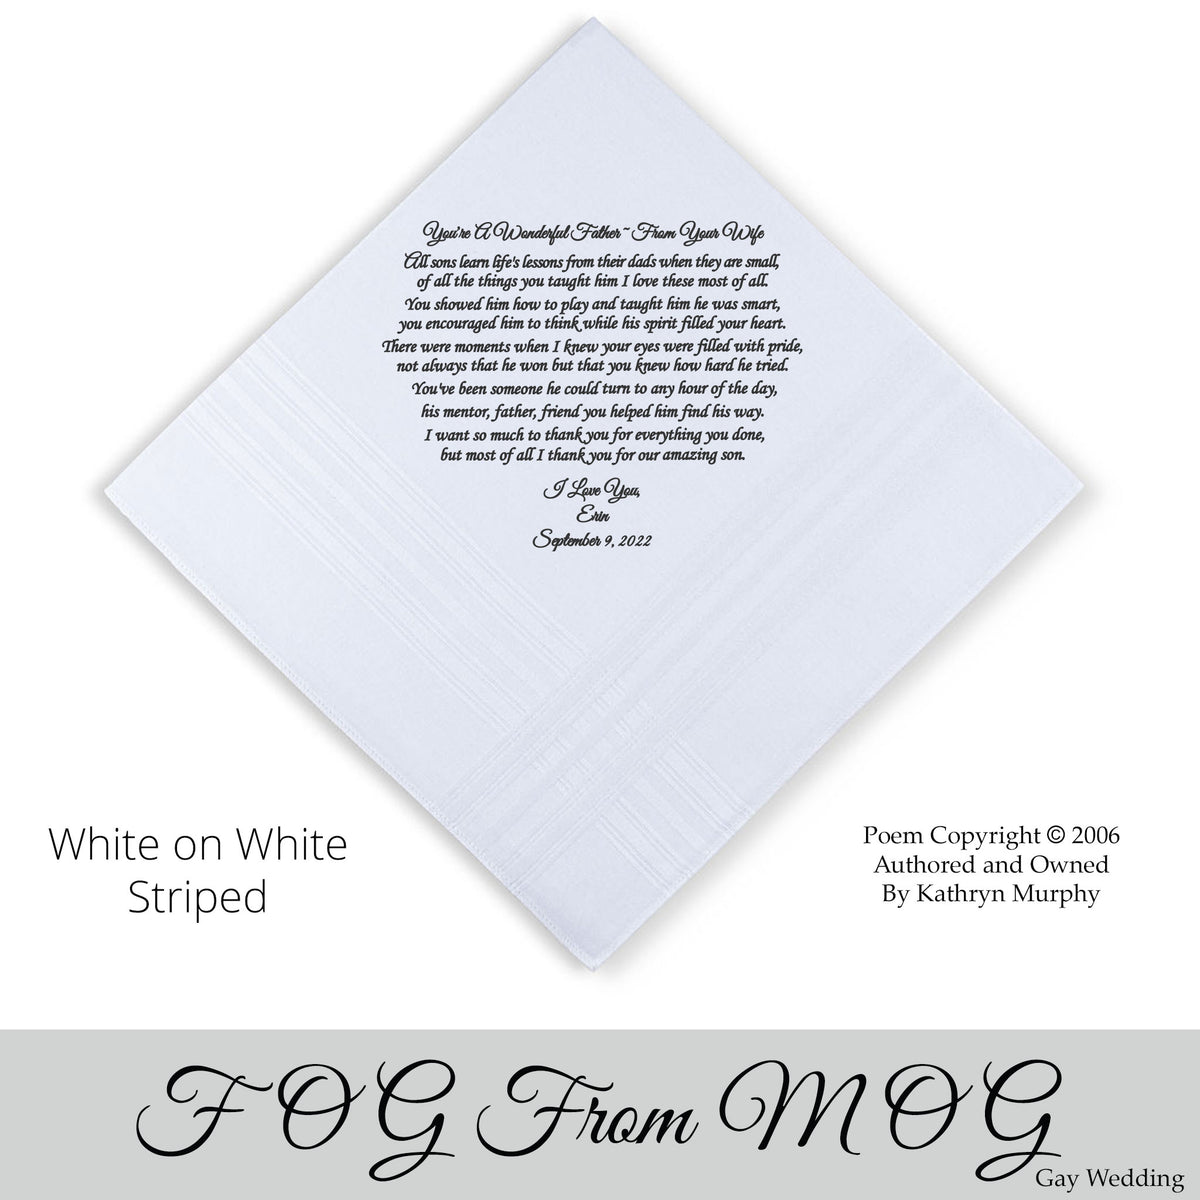 Gay Wedding Gift for the father of the groom poem printed wedding hankie